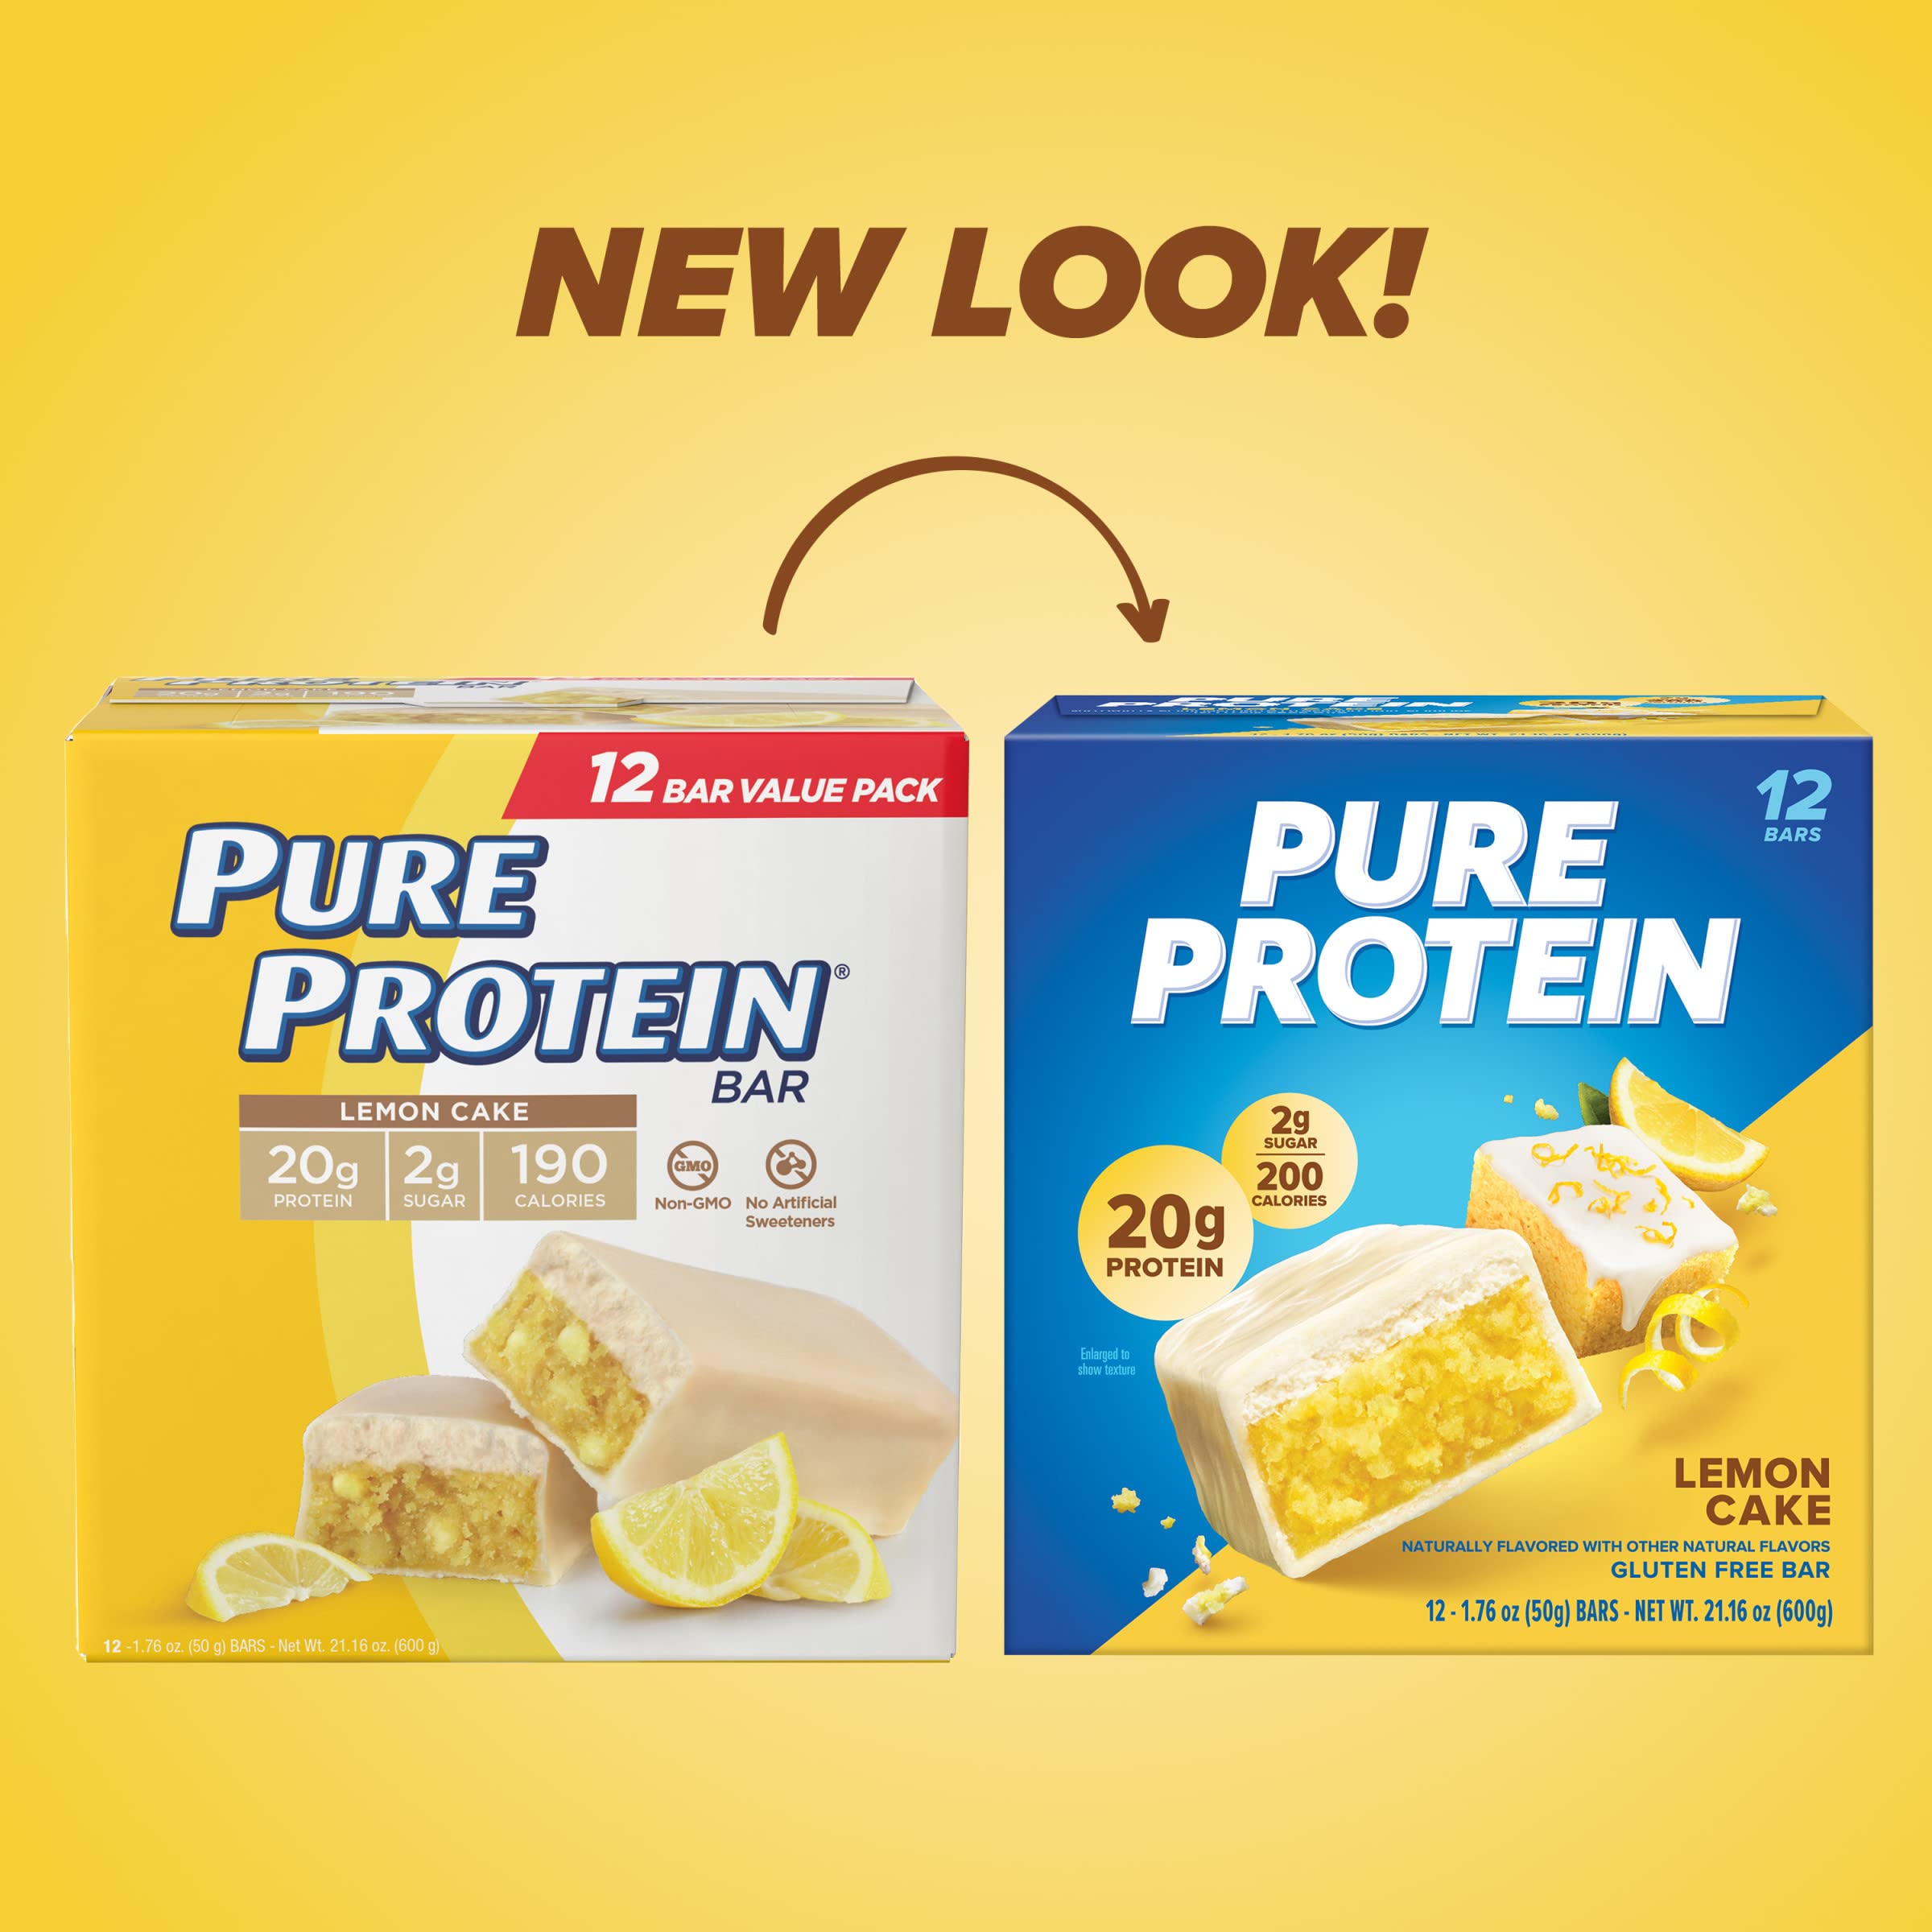 Pure Protein Bars, High Protein, Nutritious Snacks to Support Energy & Bars, High Protein, Nutritious Snacks to Support Energy